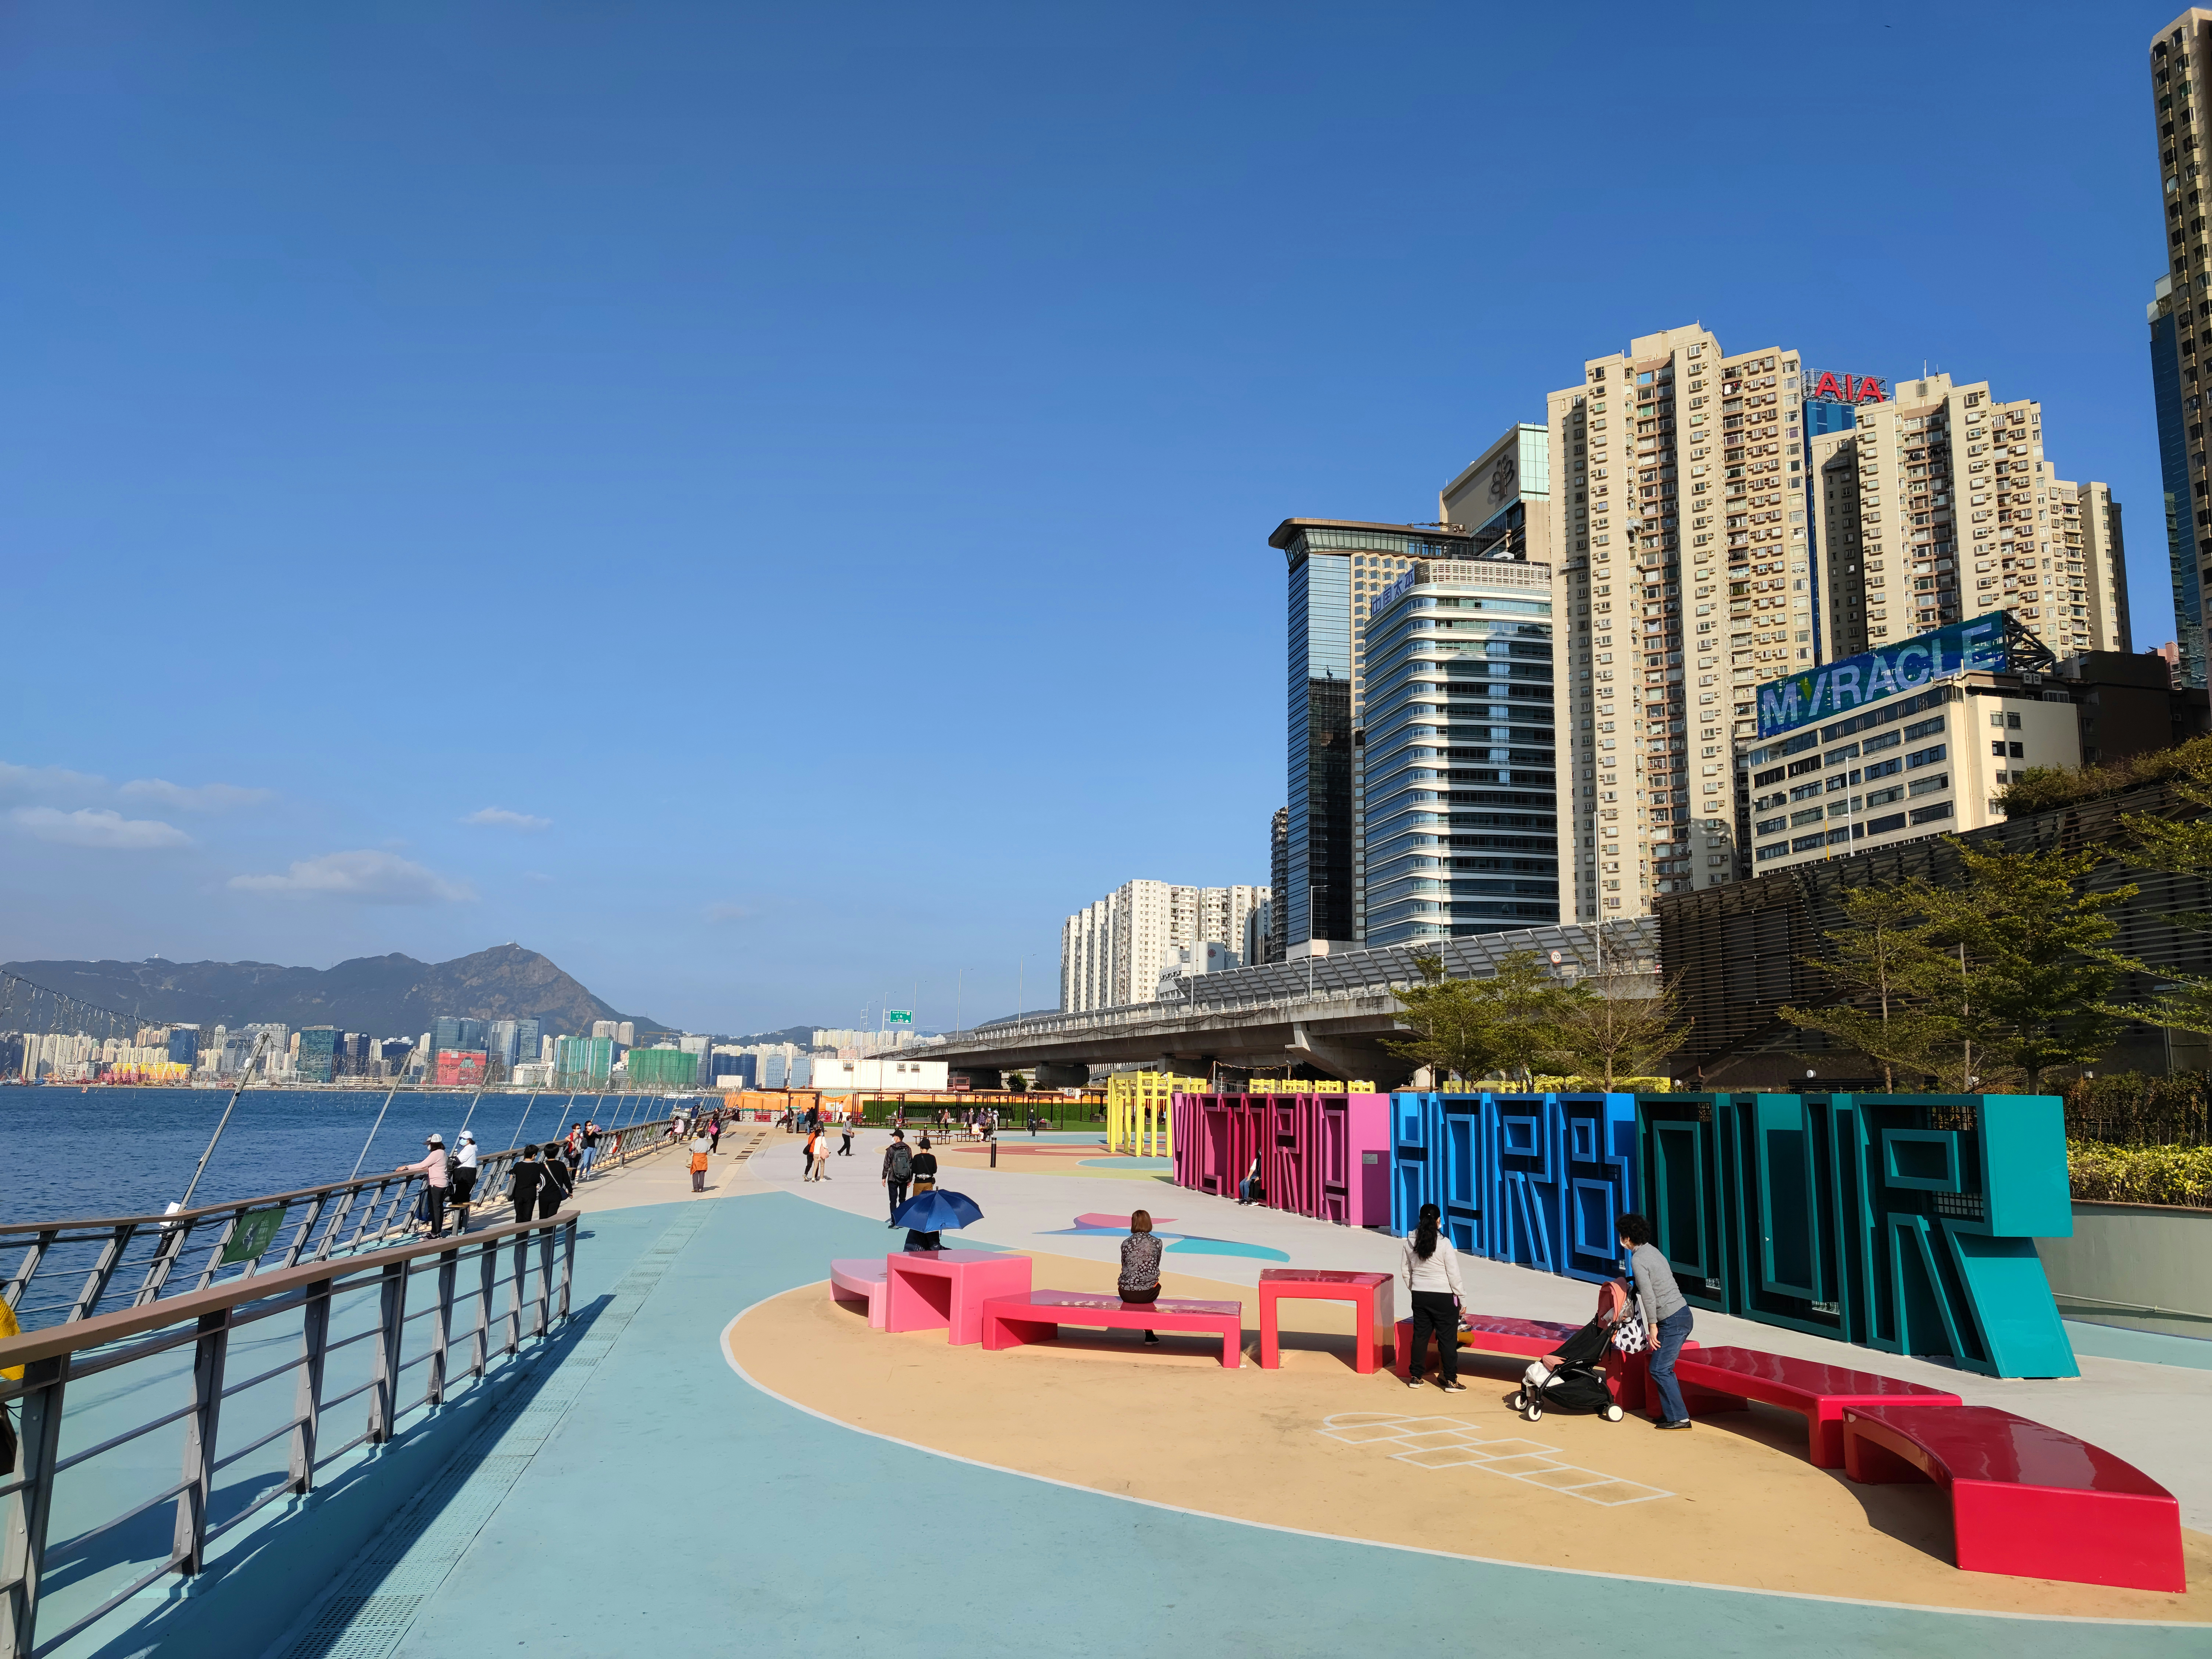 A new promenade (coastal recreational area) near Fortress Hill with recreational facilities for the citizens in Hong Kong. It provides a good sea view of Victoria Harbour. Word art installations from a contest are displayed.